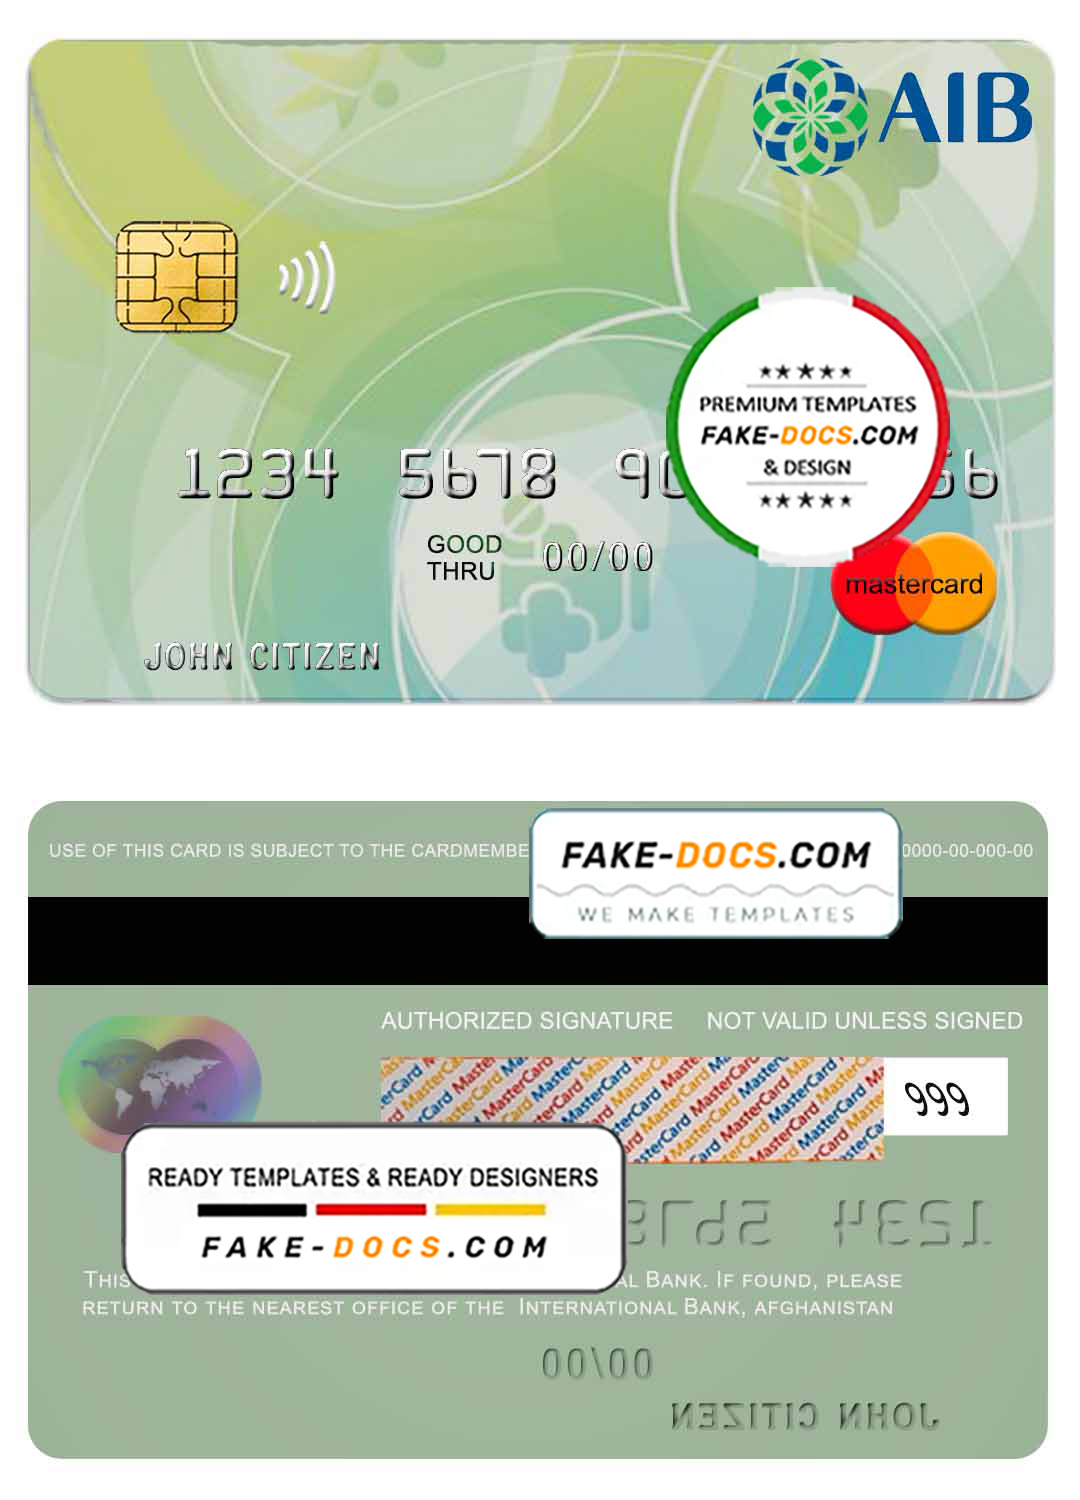 Afghanistan International Bank mastercard template in PSD format, fully editable